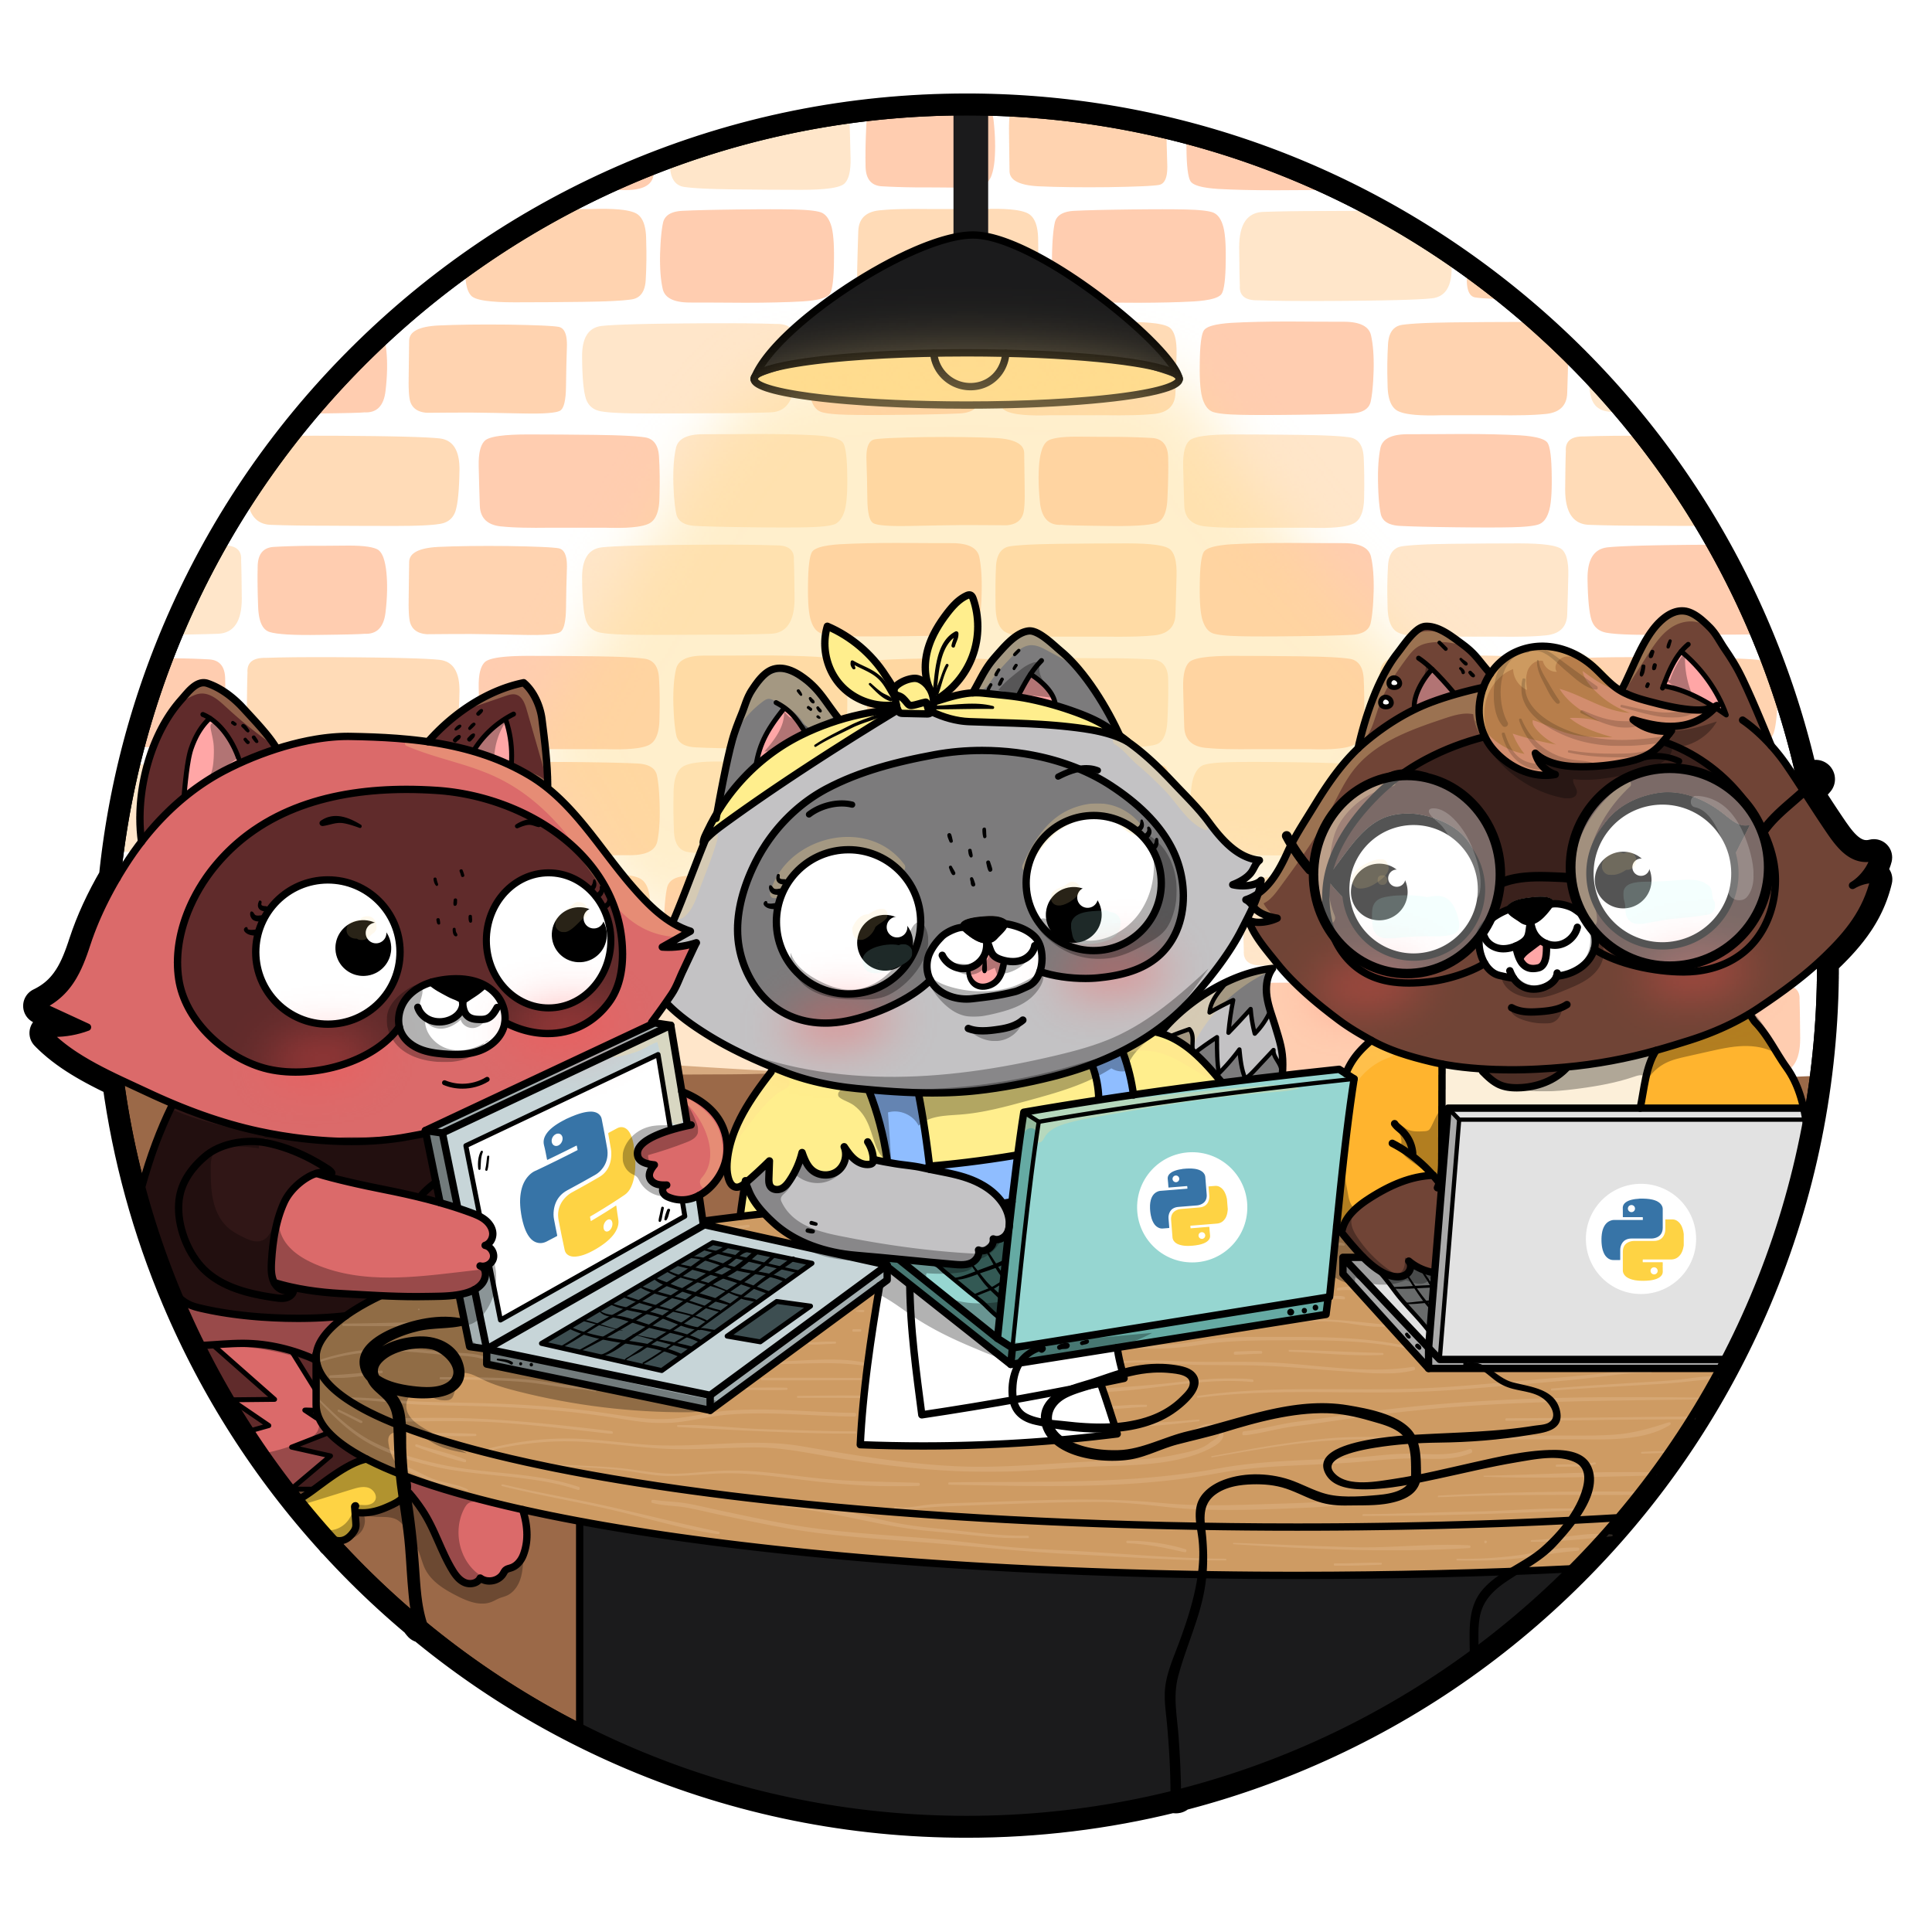 Raccoons with laptops